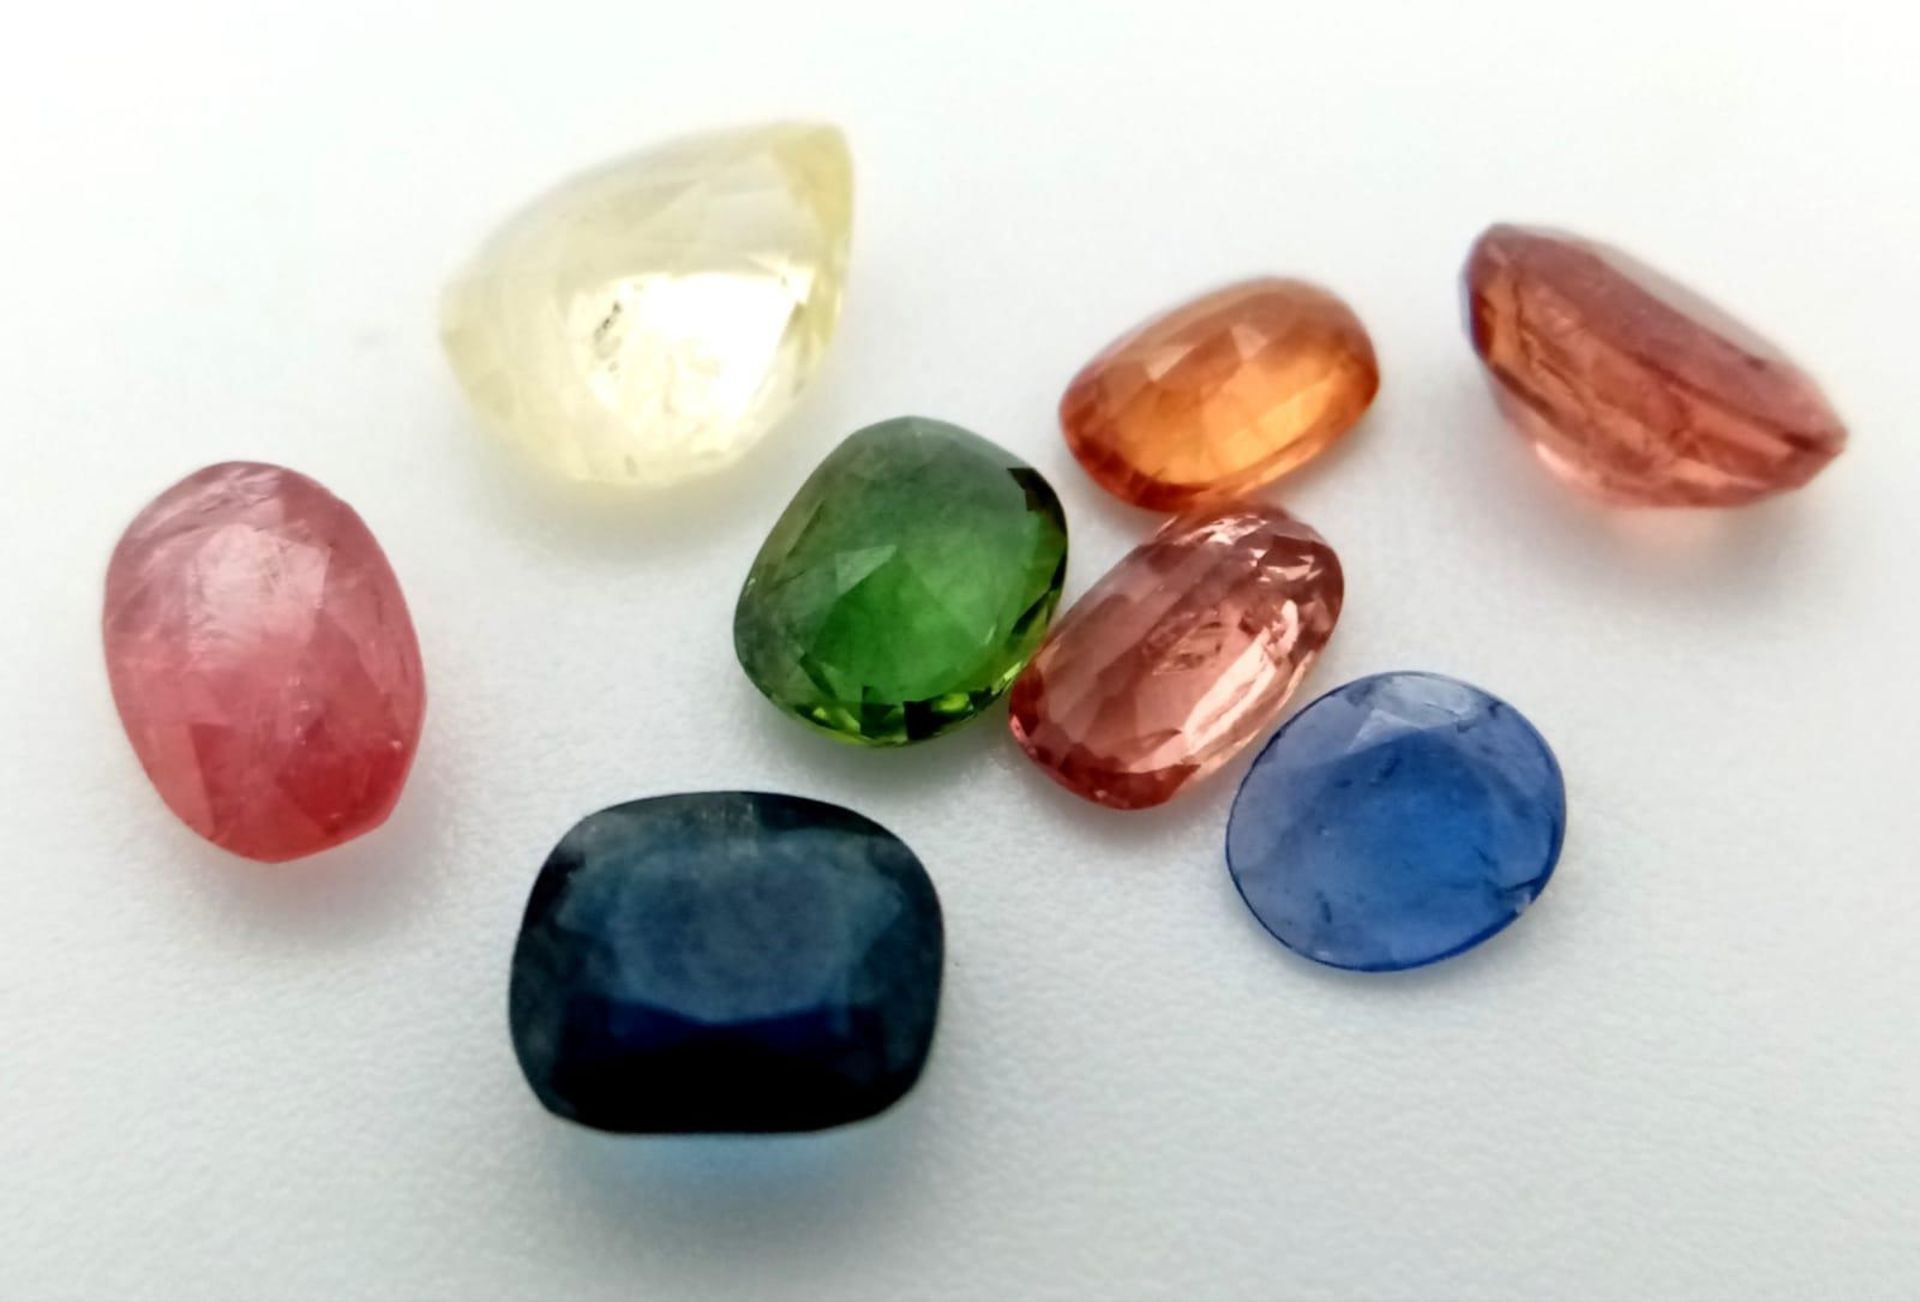 A 4.85ct Ceylon Mine Sri Lankan Sapphires Faceted Gemstones Lot of 8 Pieces. Mixed Shapes.